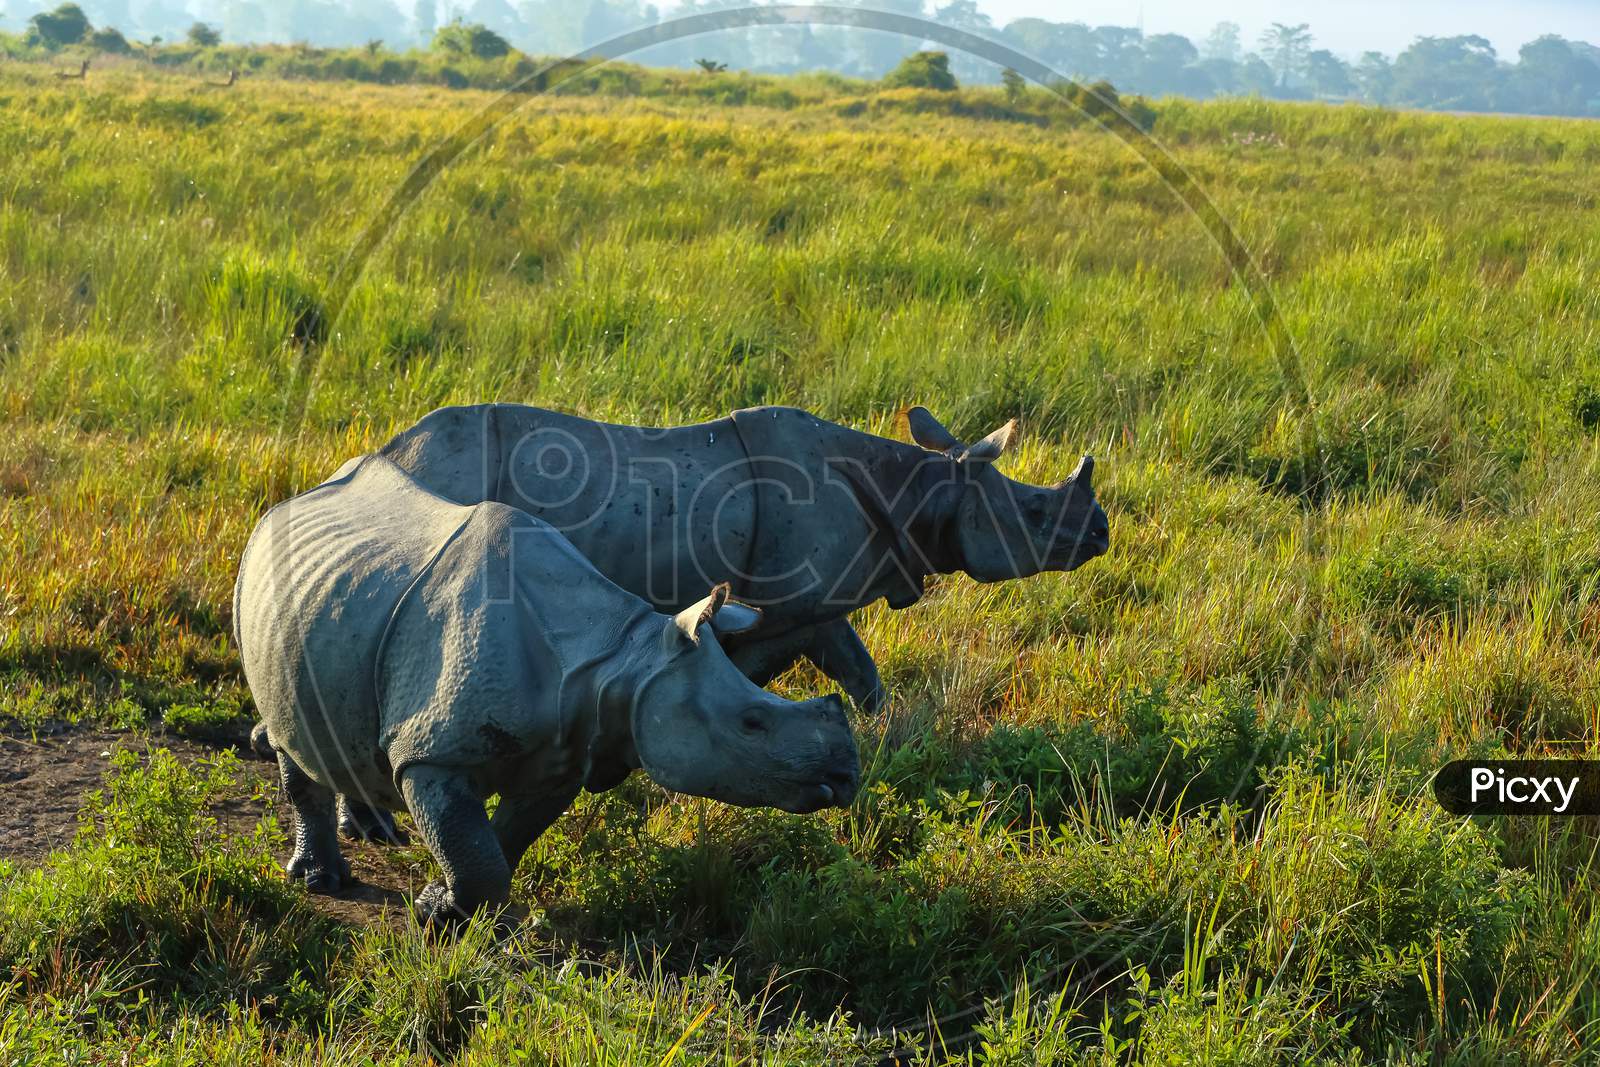 A side standing image of two singled horned rhinos standing and grazing amidst tall grass